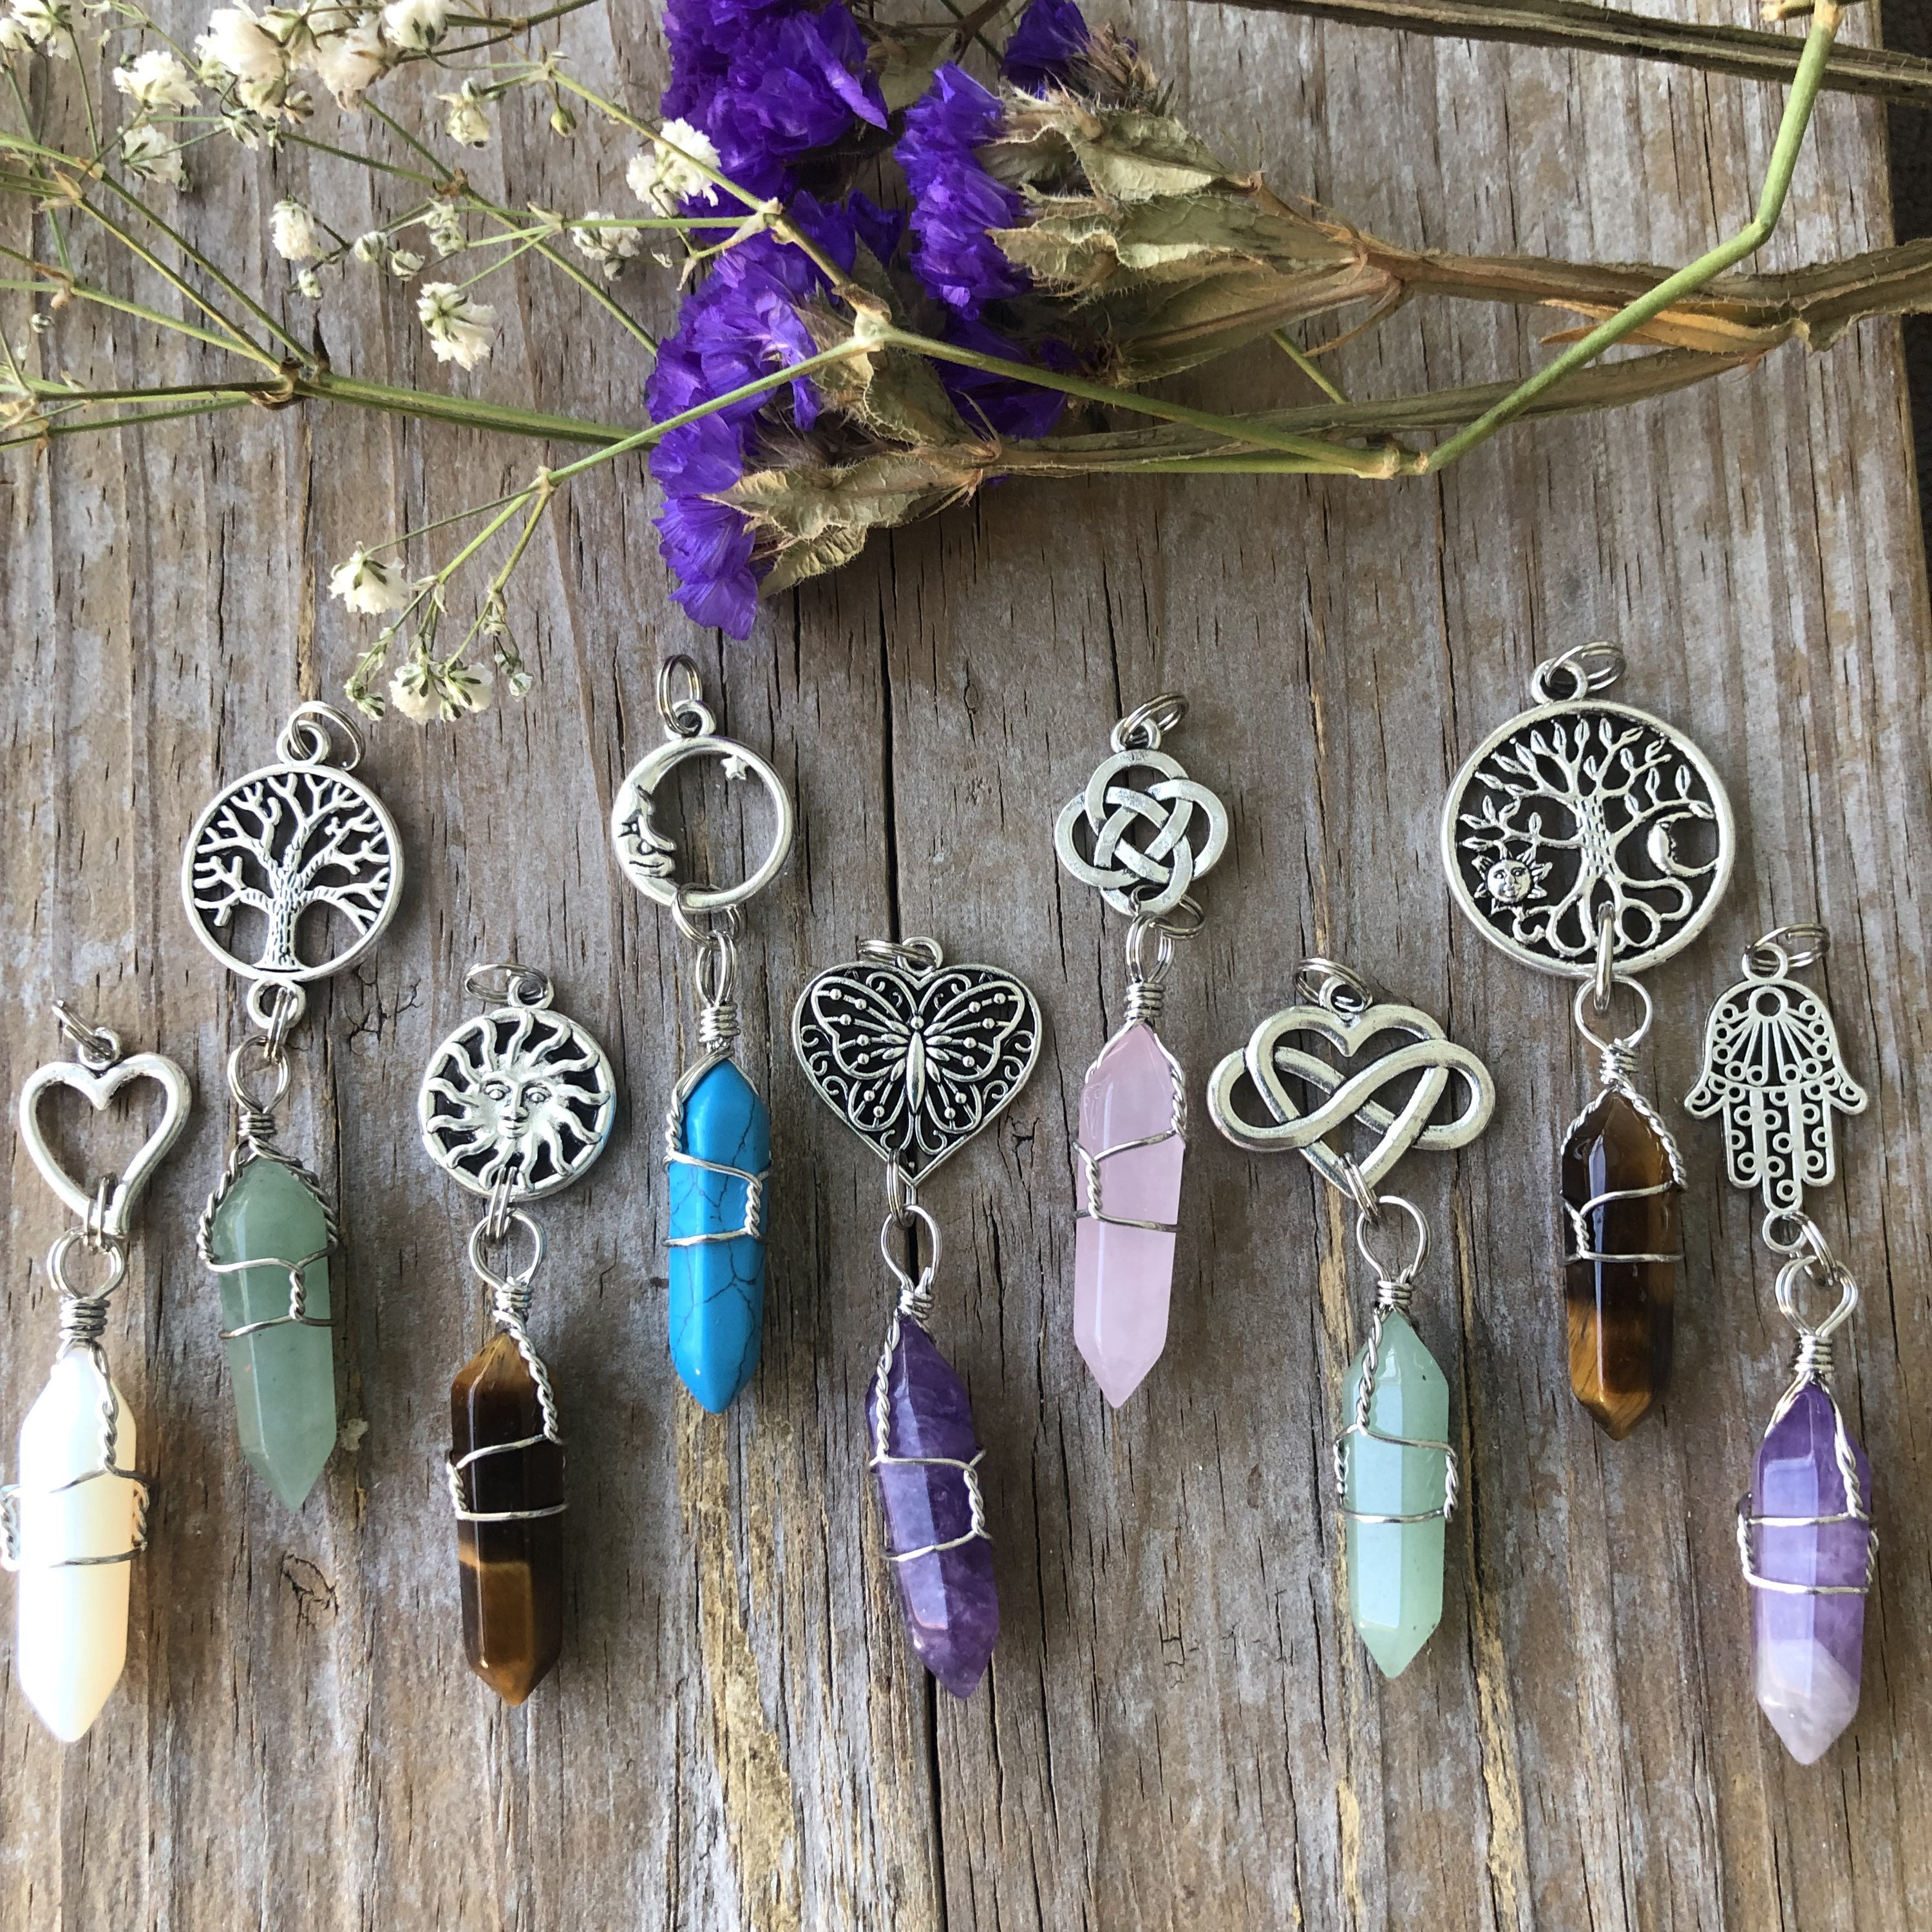 Crystal Fae Charms Fairy Charms Keychains Mirror Charms 